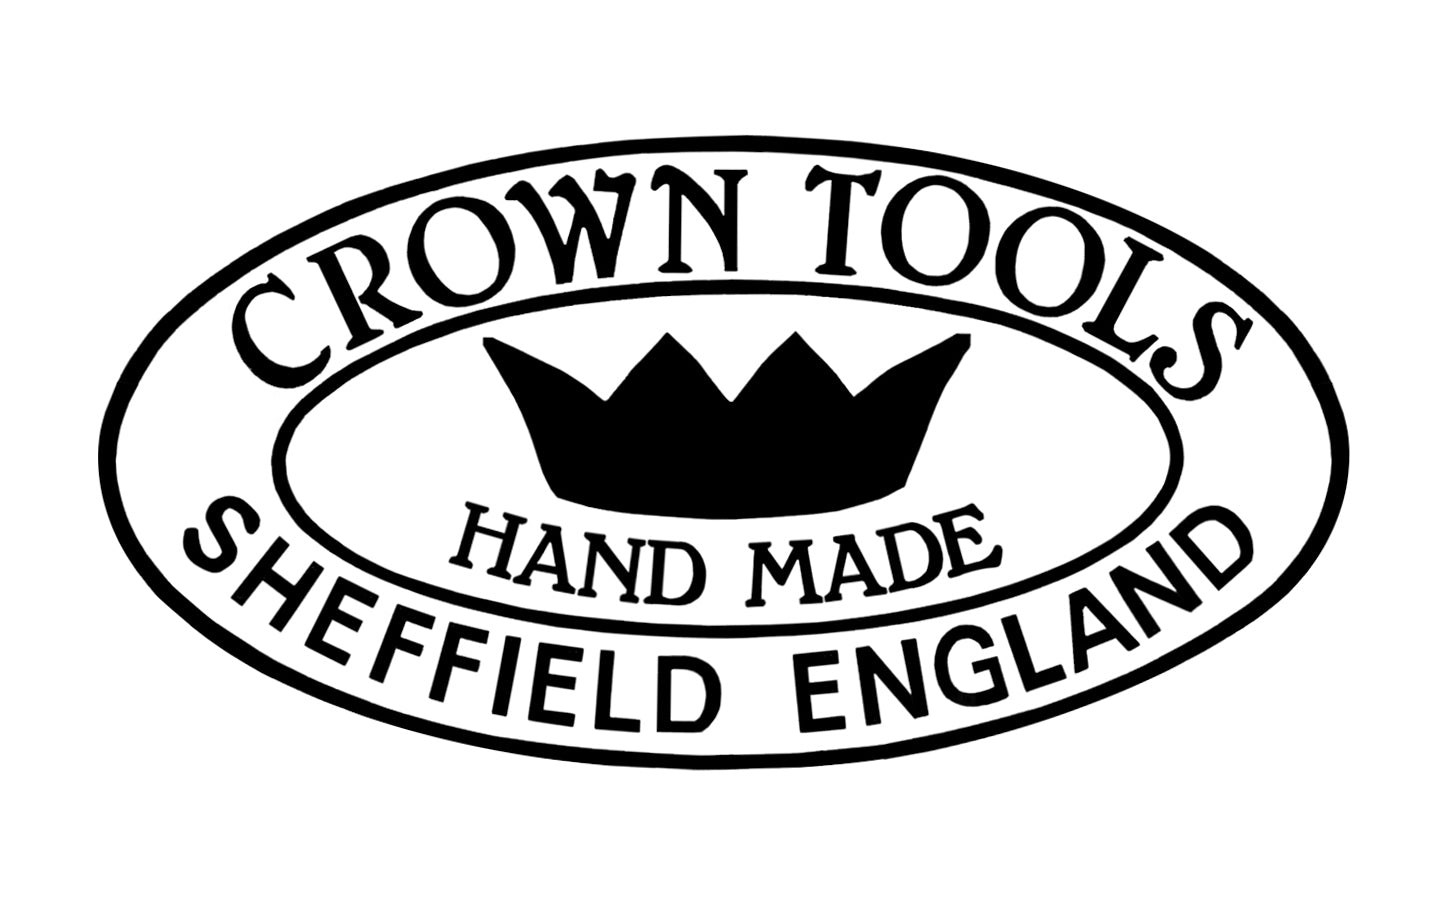 A 3/8" Corner Chisel made by Crown Tools. A handy, time-saving tool used after drilling or routing a mortise. The mortice chisel has an inside bevel. 90 degree V-chisel used to square the mortise corners, hinges, etc.   Made in Sheffield, England. Model 175CC